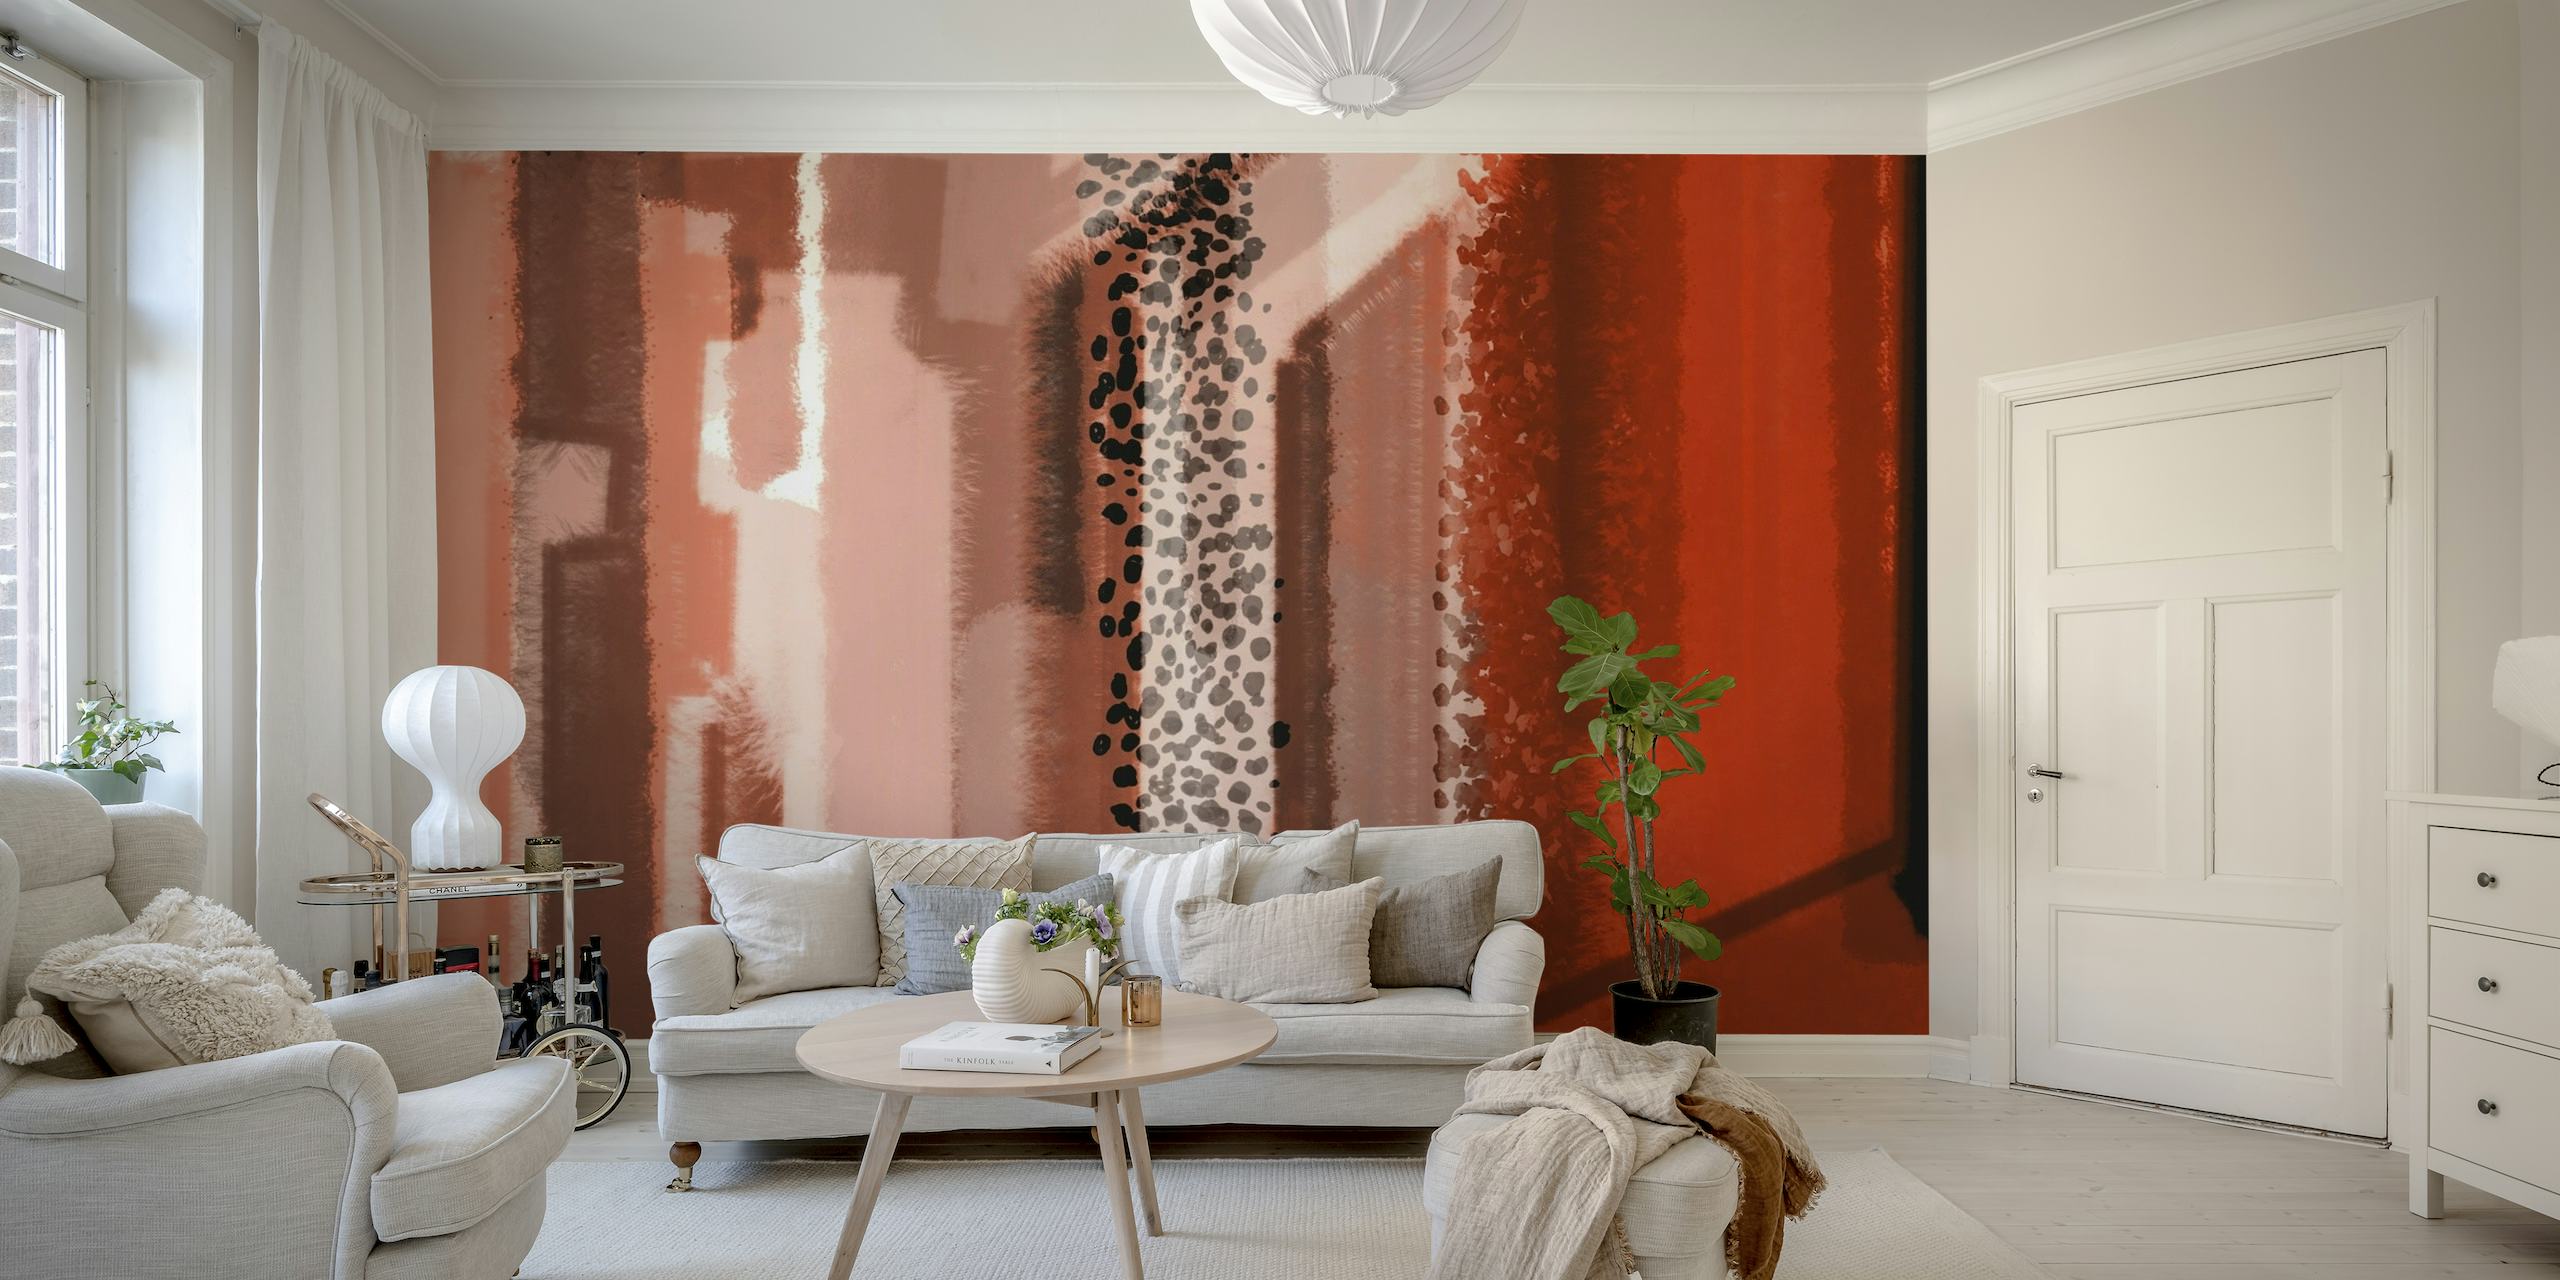 Abstract warm-toned wall mural with a modernist aesthetic